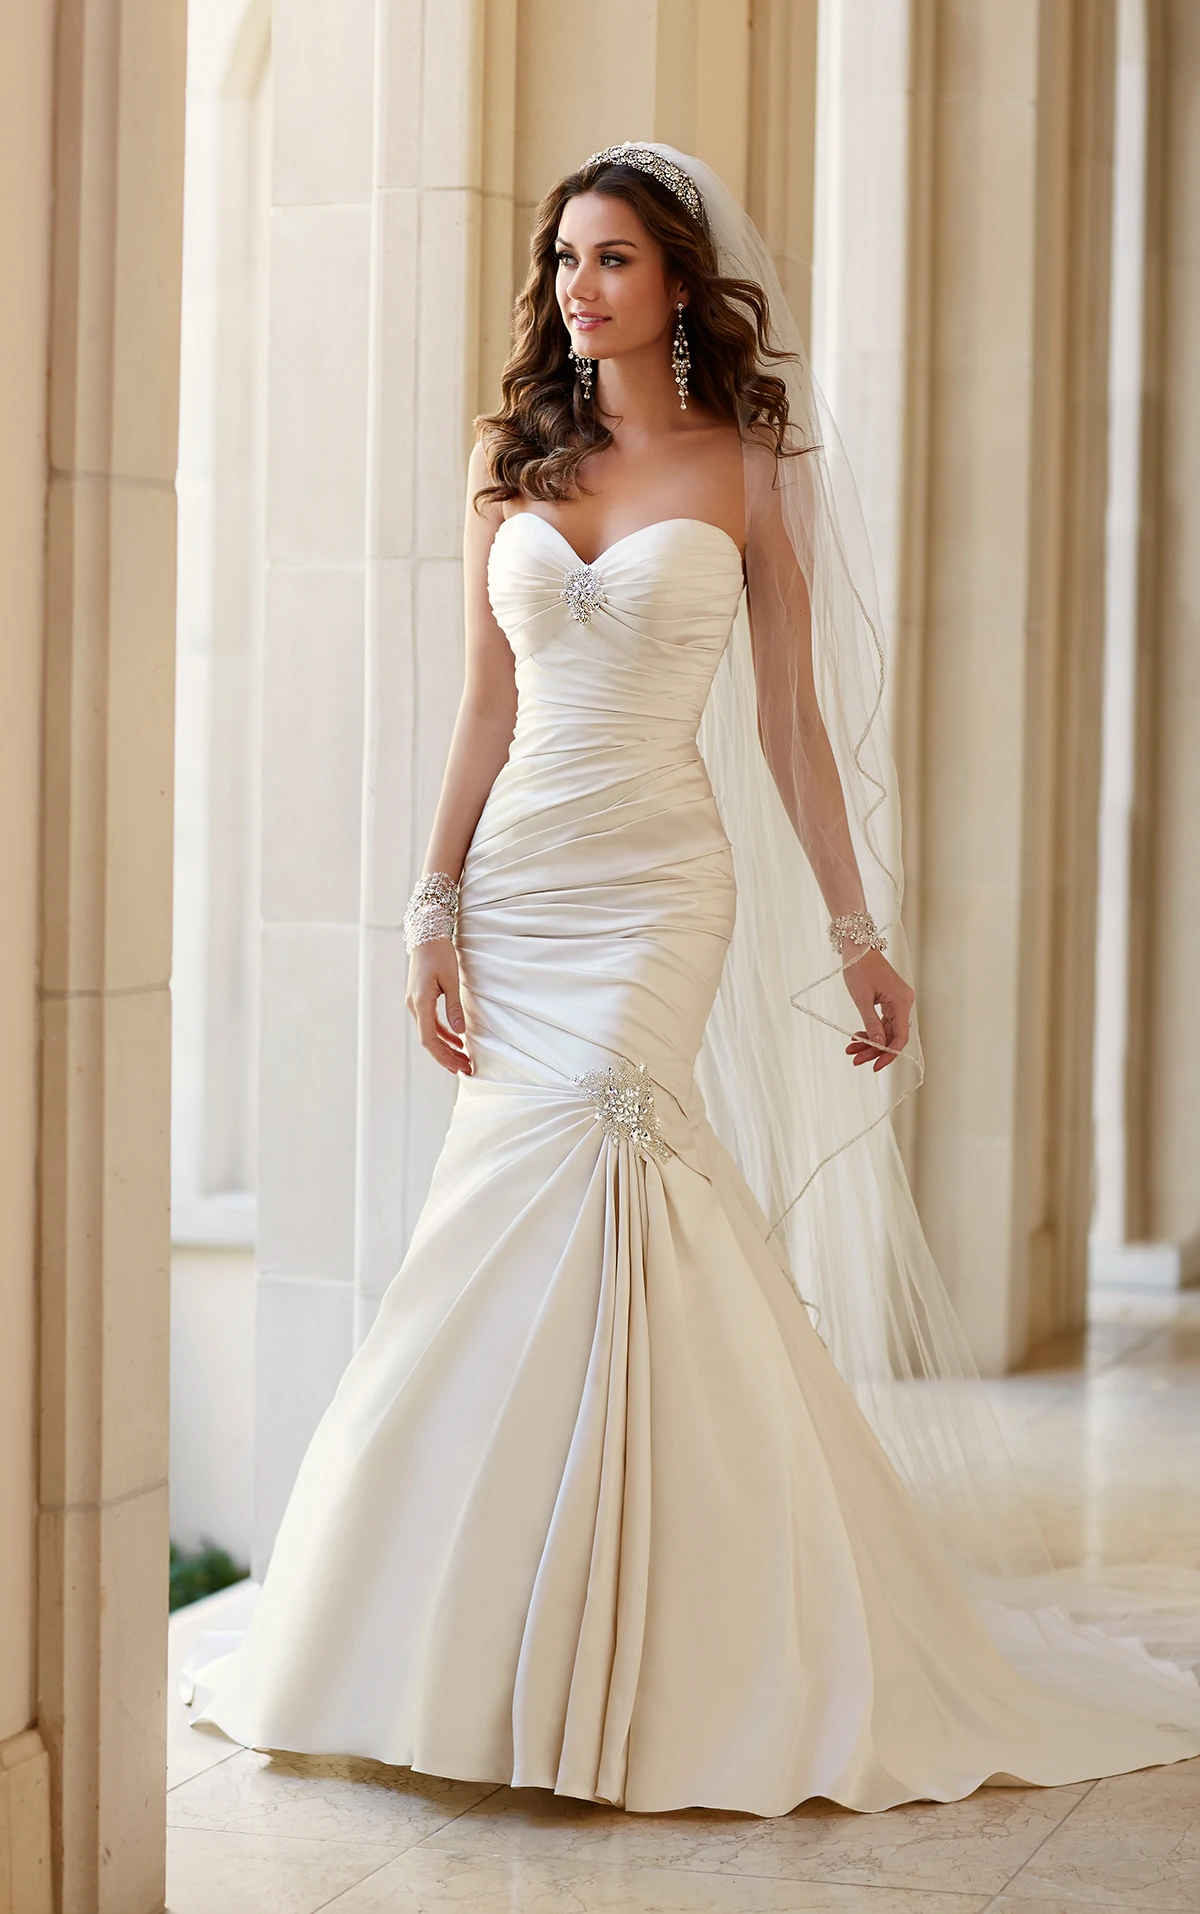 Who Can Wear Strapless Wedding Dresses? | The Best Wedding 